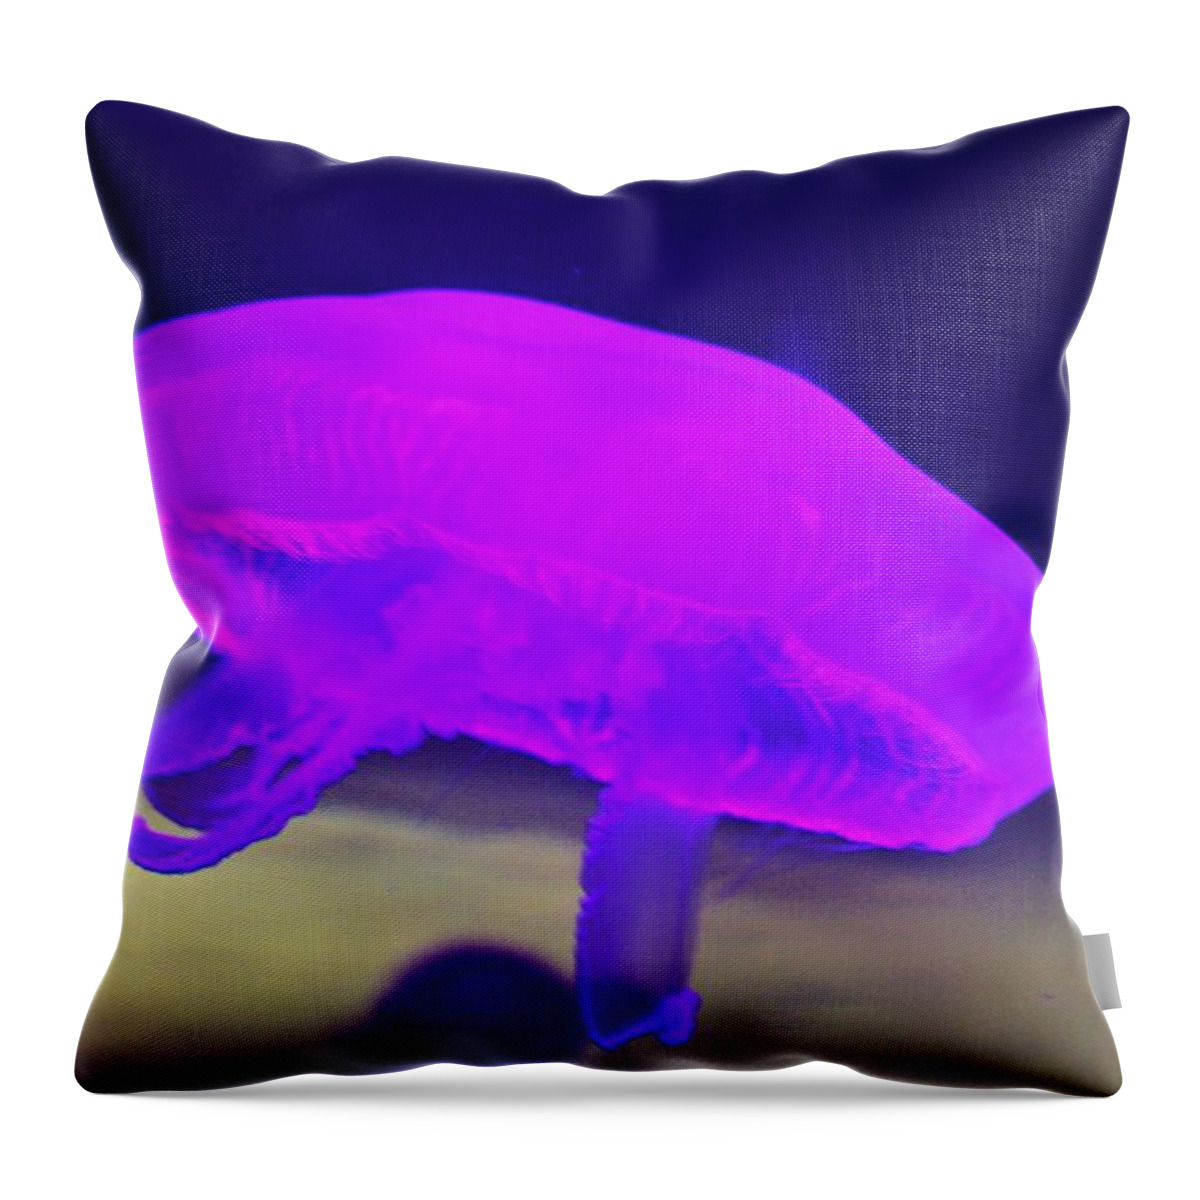 Jellyfish Throw Pillow featuring the photograph Jellyfish by Vadim Levin